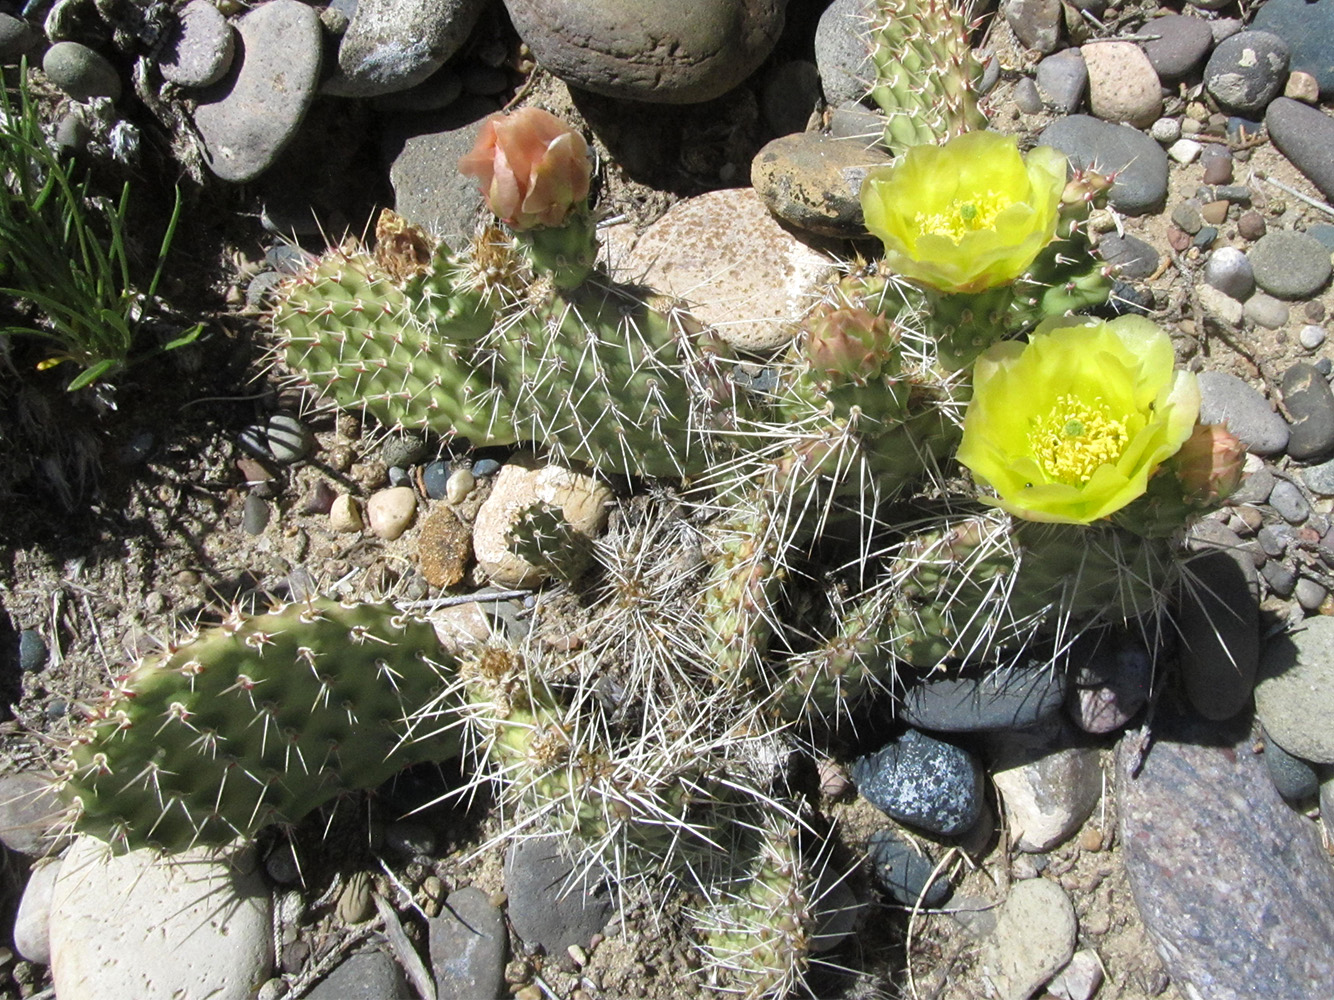 Top view of spiny cactus with flat pads, yellow flower and orange flower bud growing among smooth rocks.